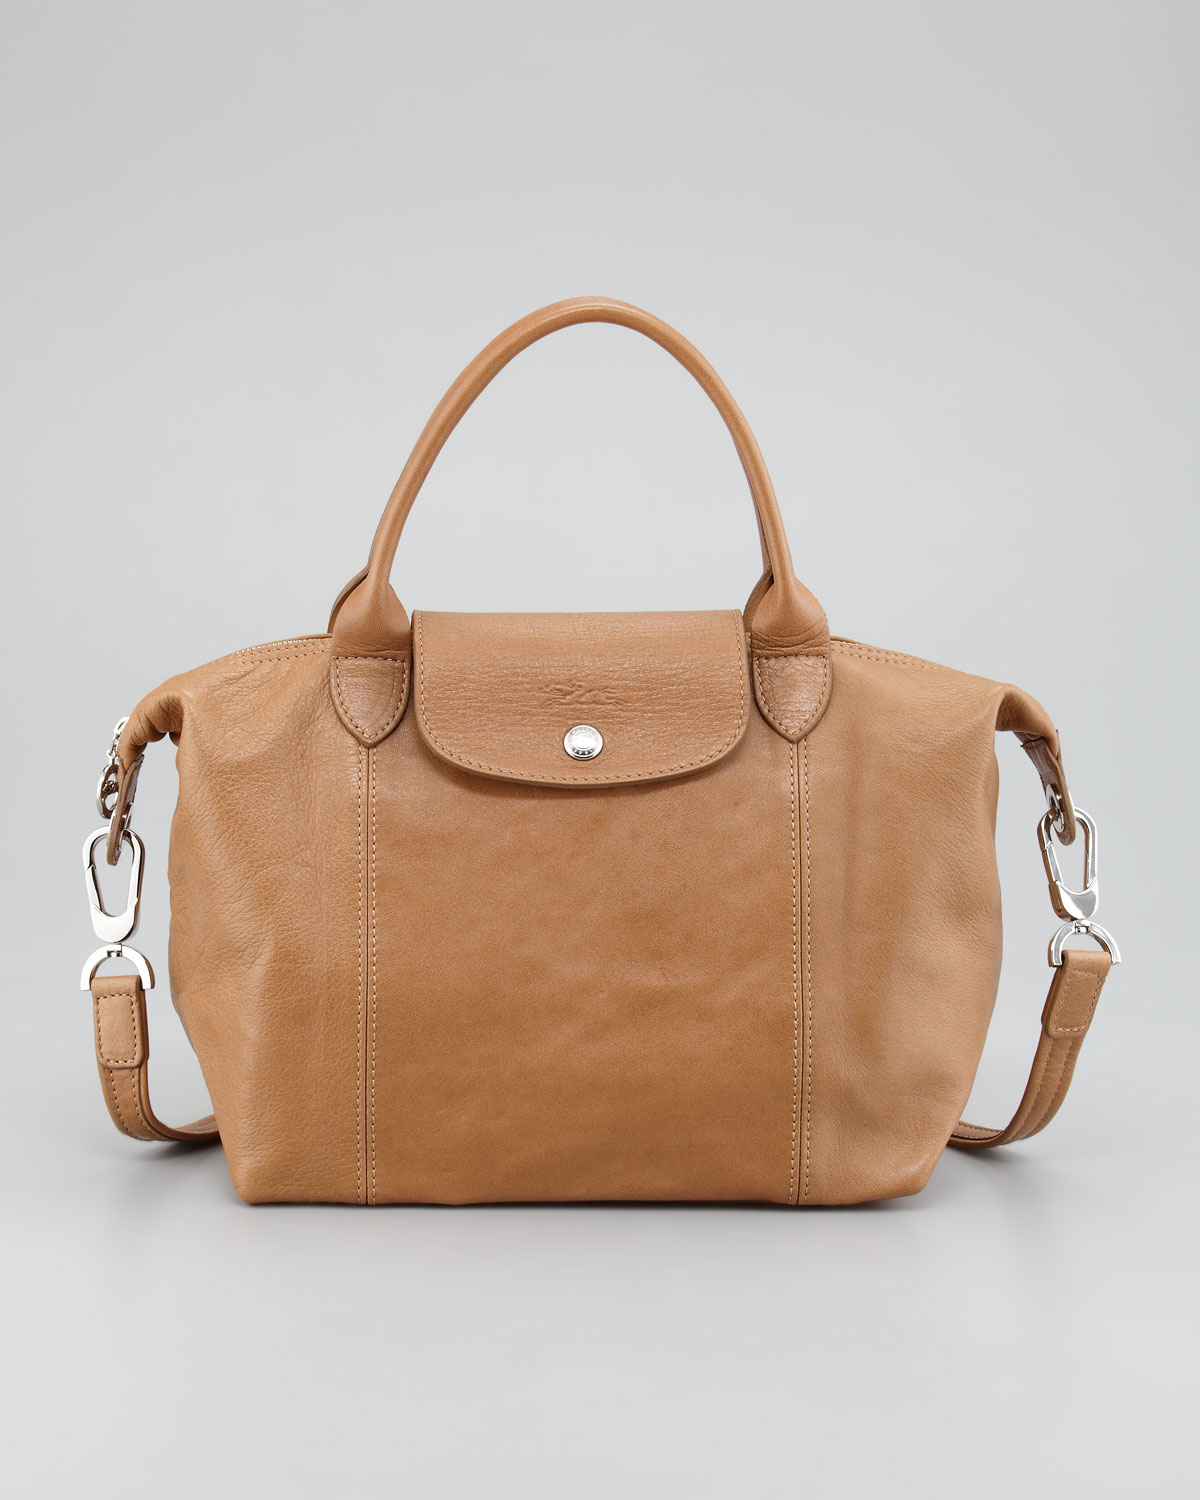 Longchamp Small Leather Tote Bag in Brown - Lyst